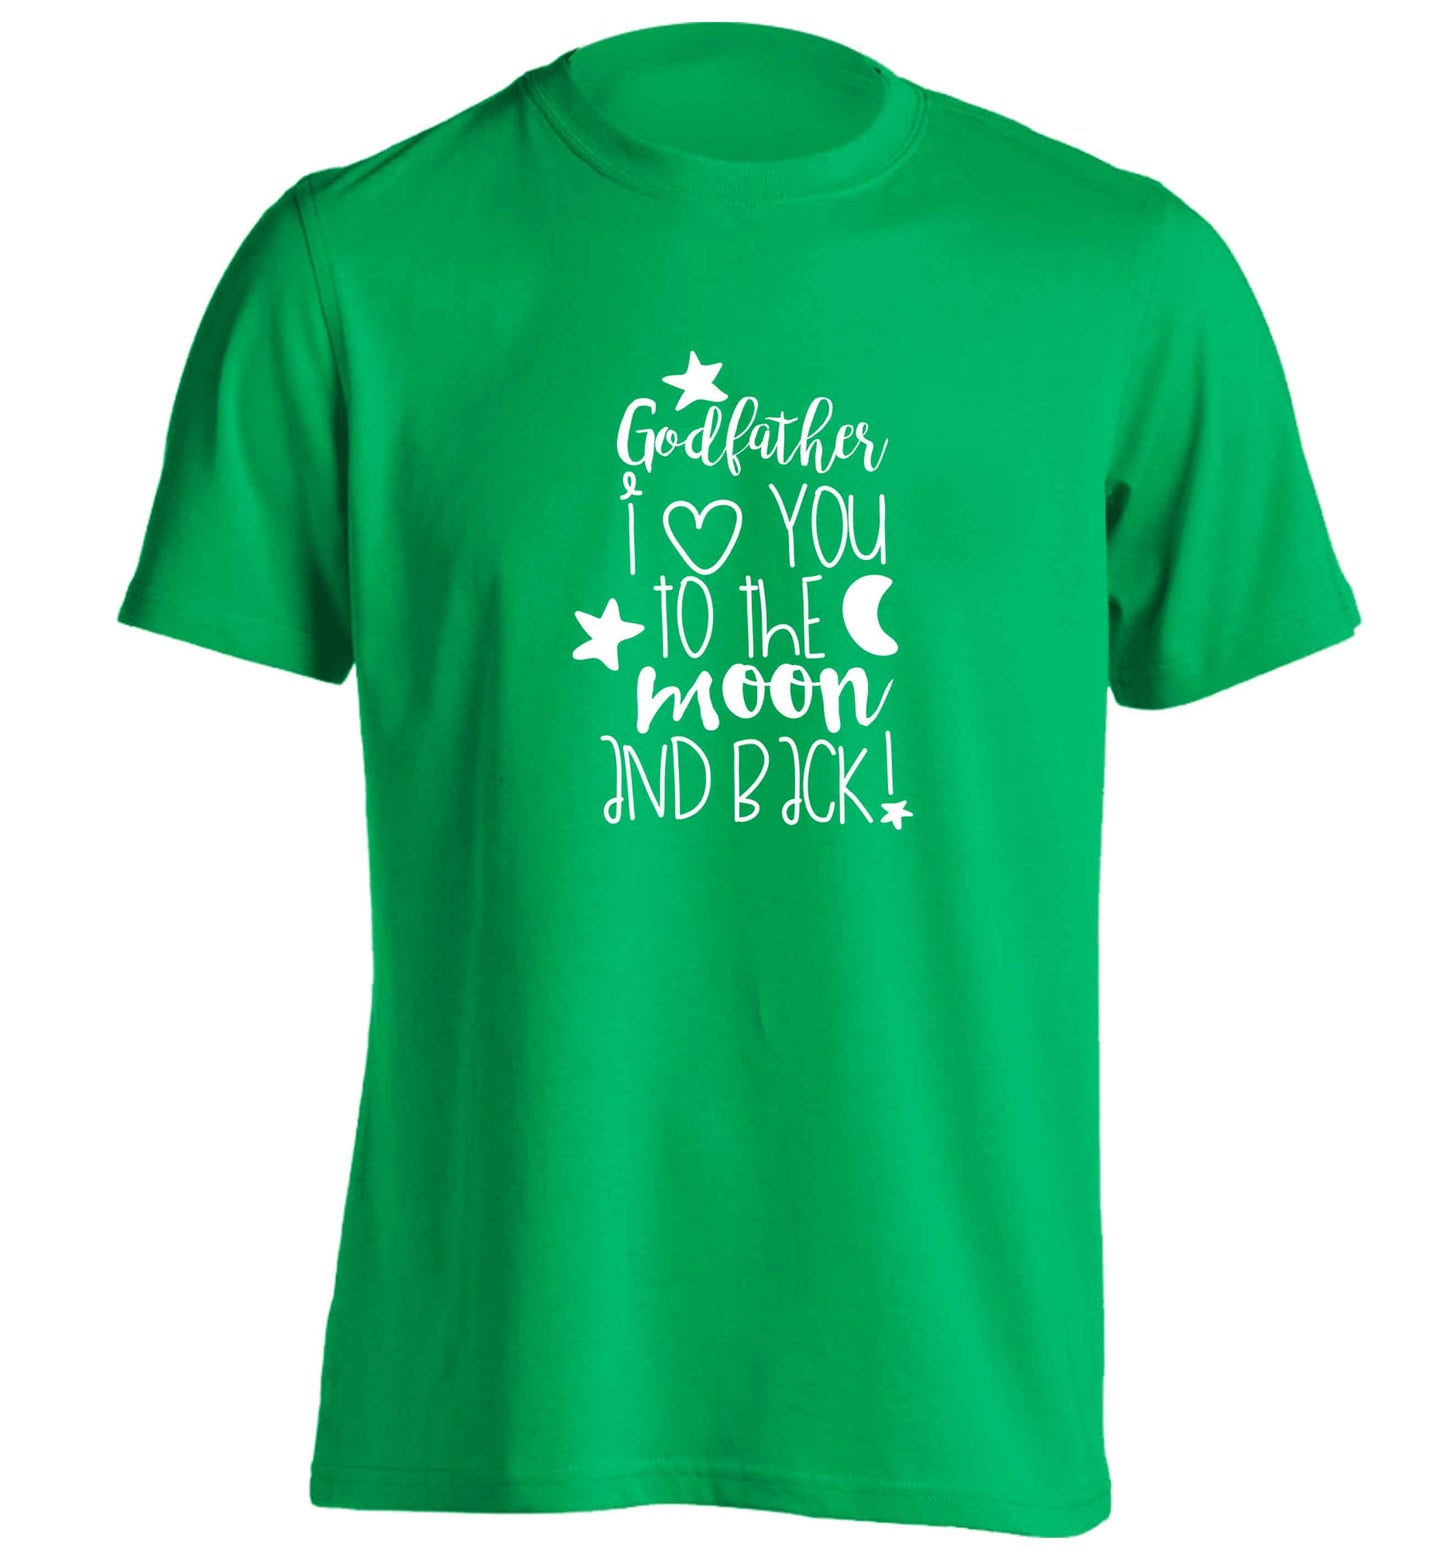 Godfather I love you to the moon and back adults unisex green Tshirt 2XL